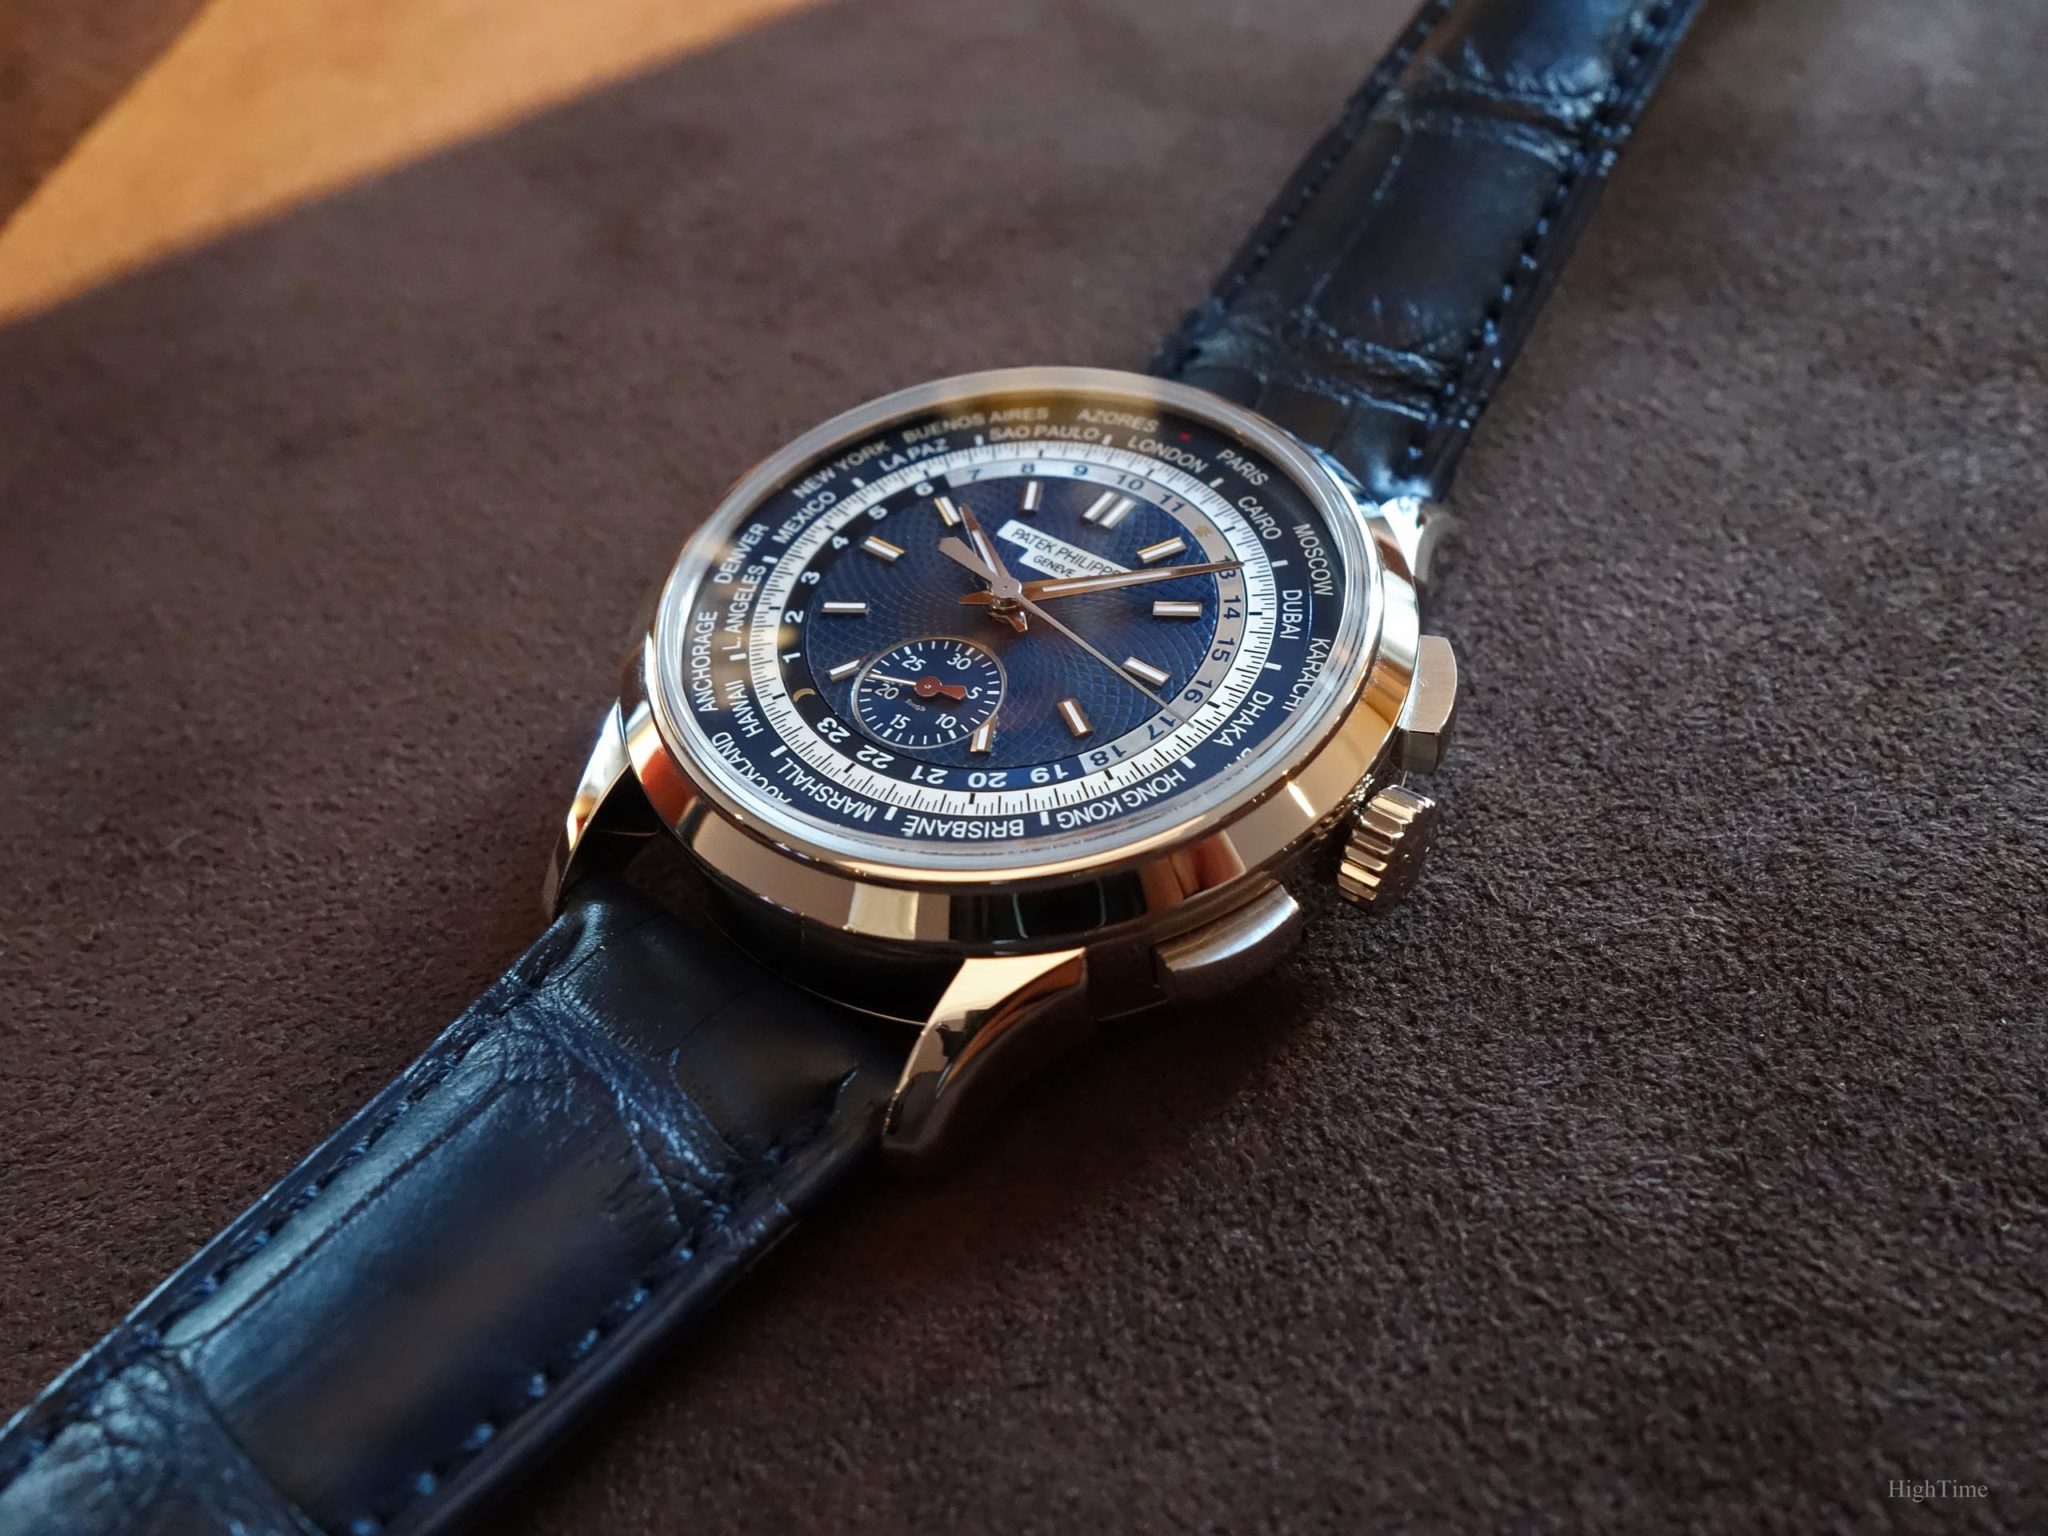 Patek Philippe 5930G World Time Chronograph - Review & Pictures - HIGHTIME